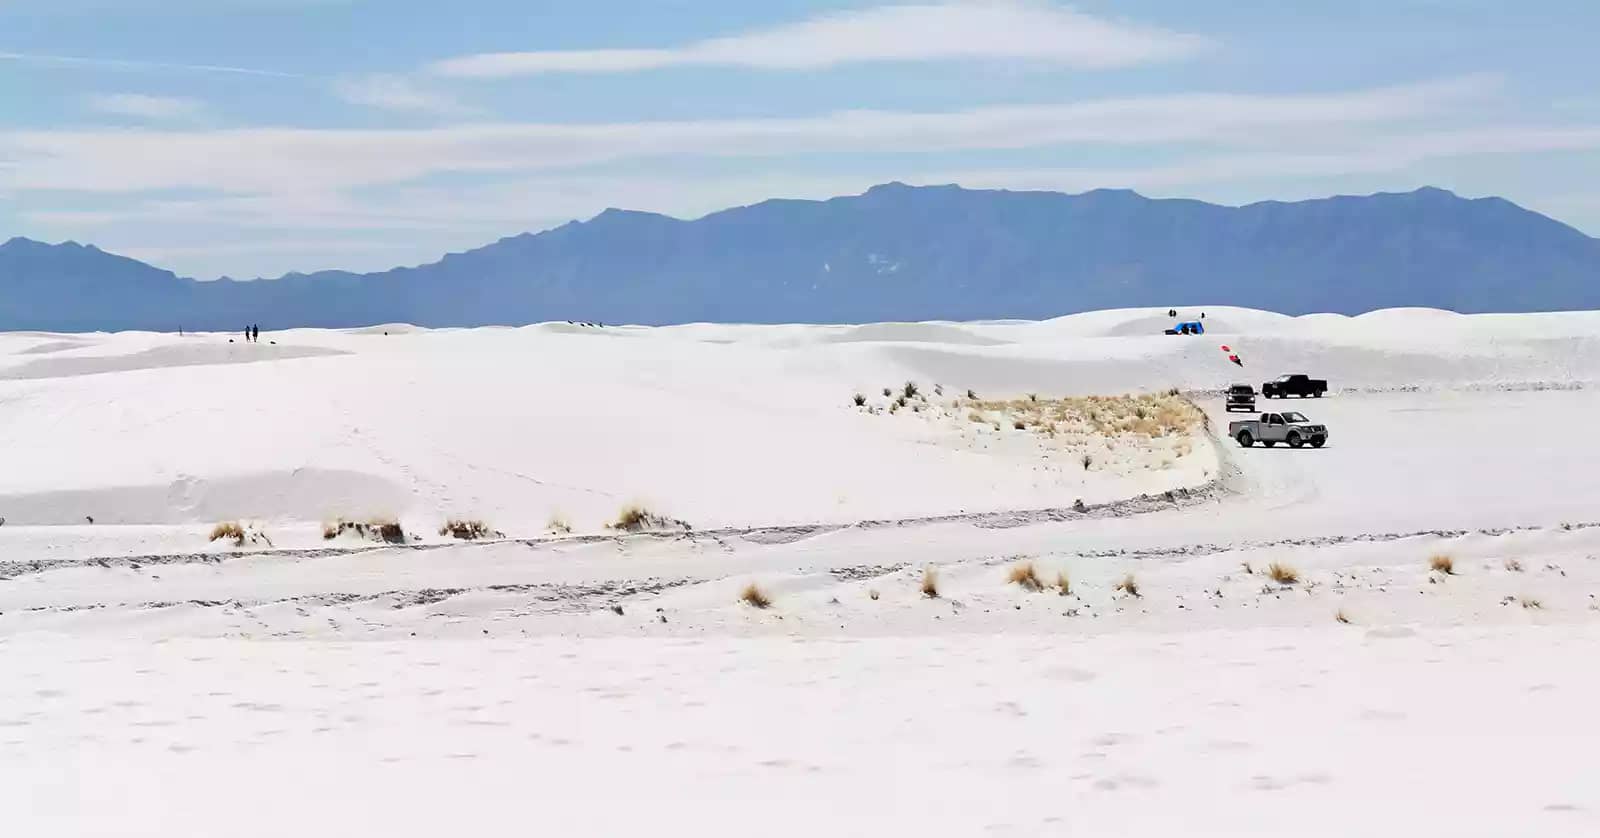 A panorama of snow at White Sands with a mountain backdrop, scenery that's one of the top reasons to go camping in New Mexico